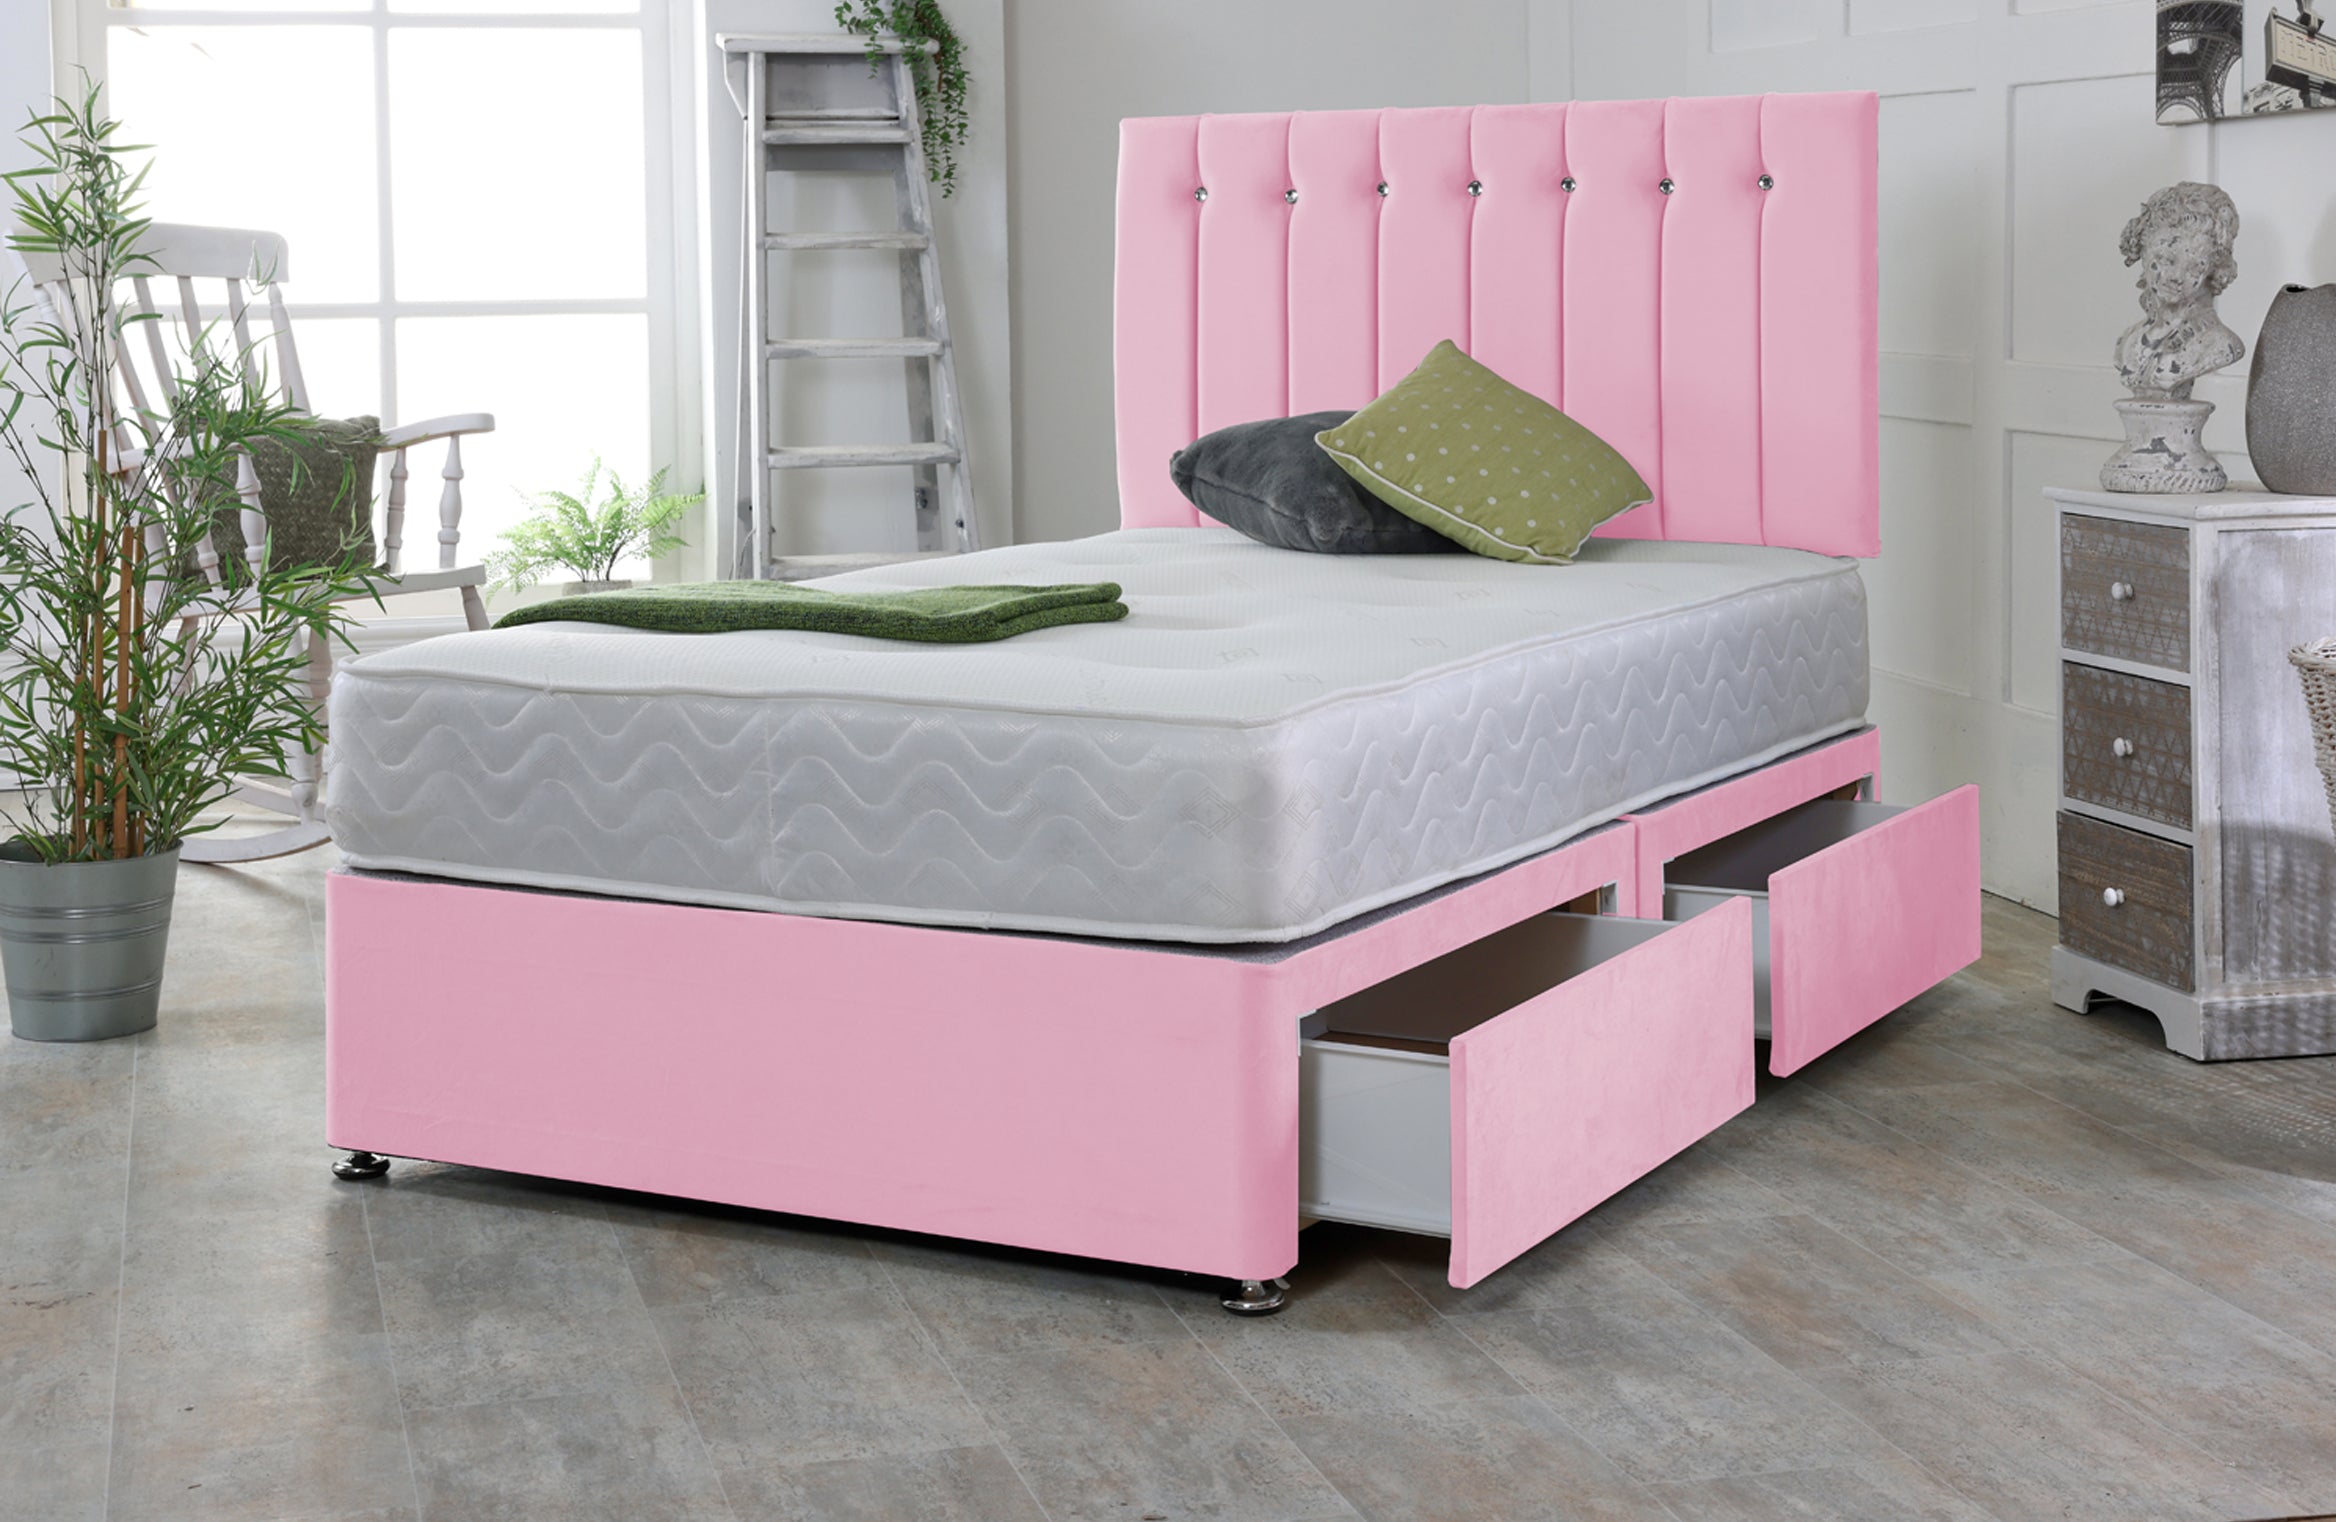 Delight Divan Bed Base Set with Mattress and Headboard